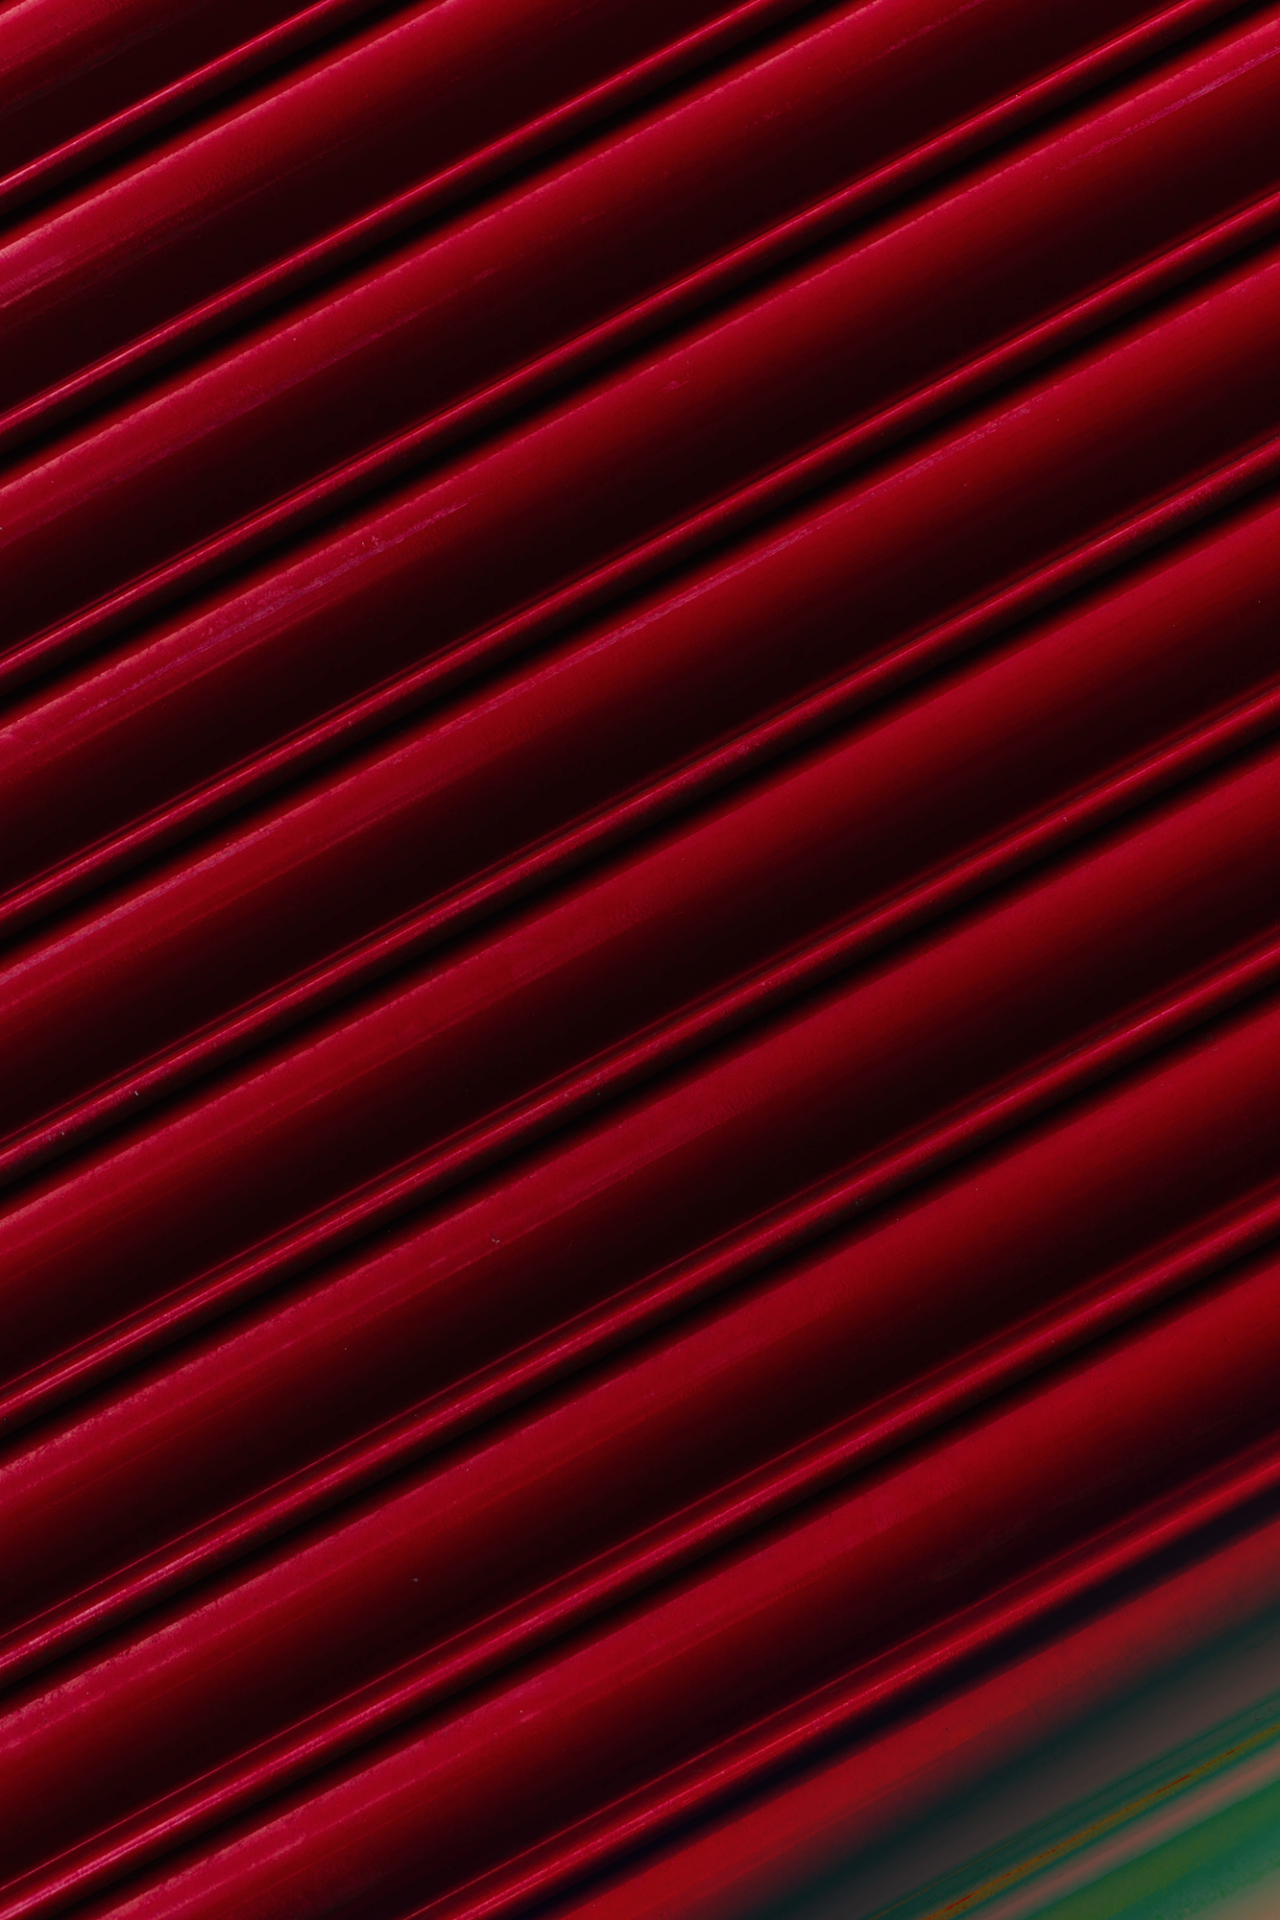 Red, glossy, and parallel lines with a slight reflection of green and blue lights at the bottom.